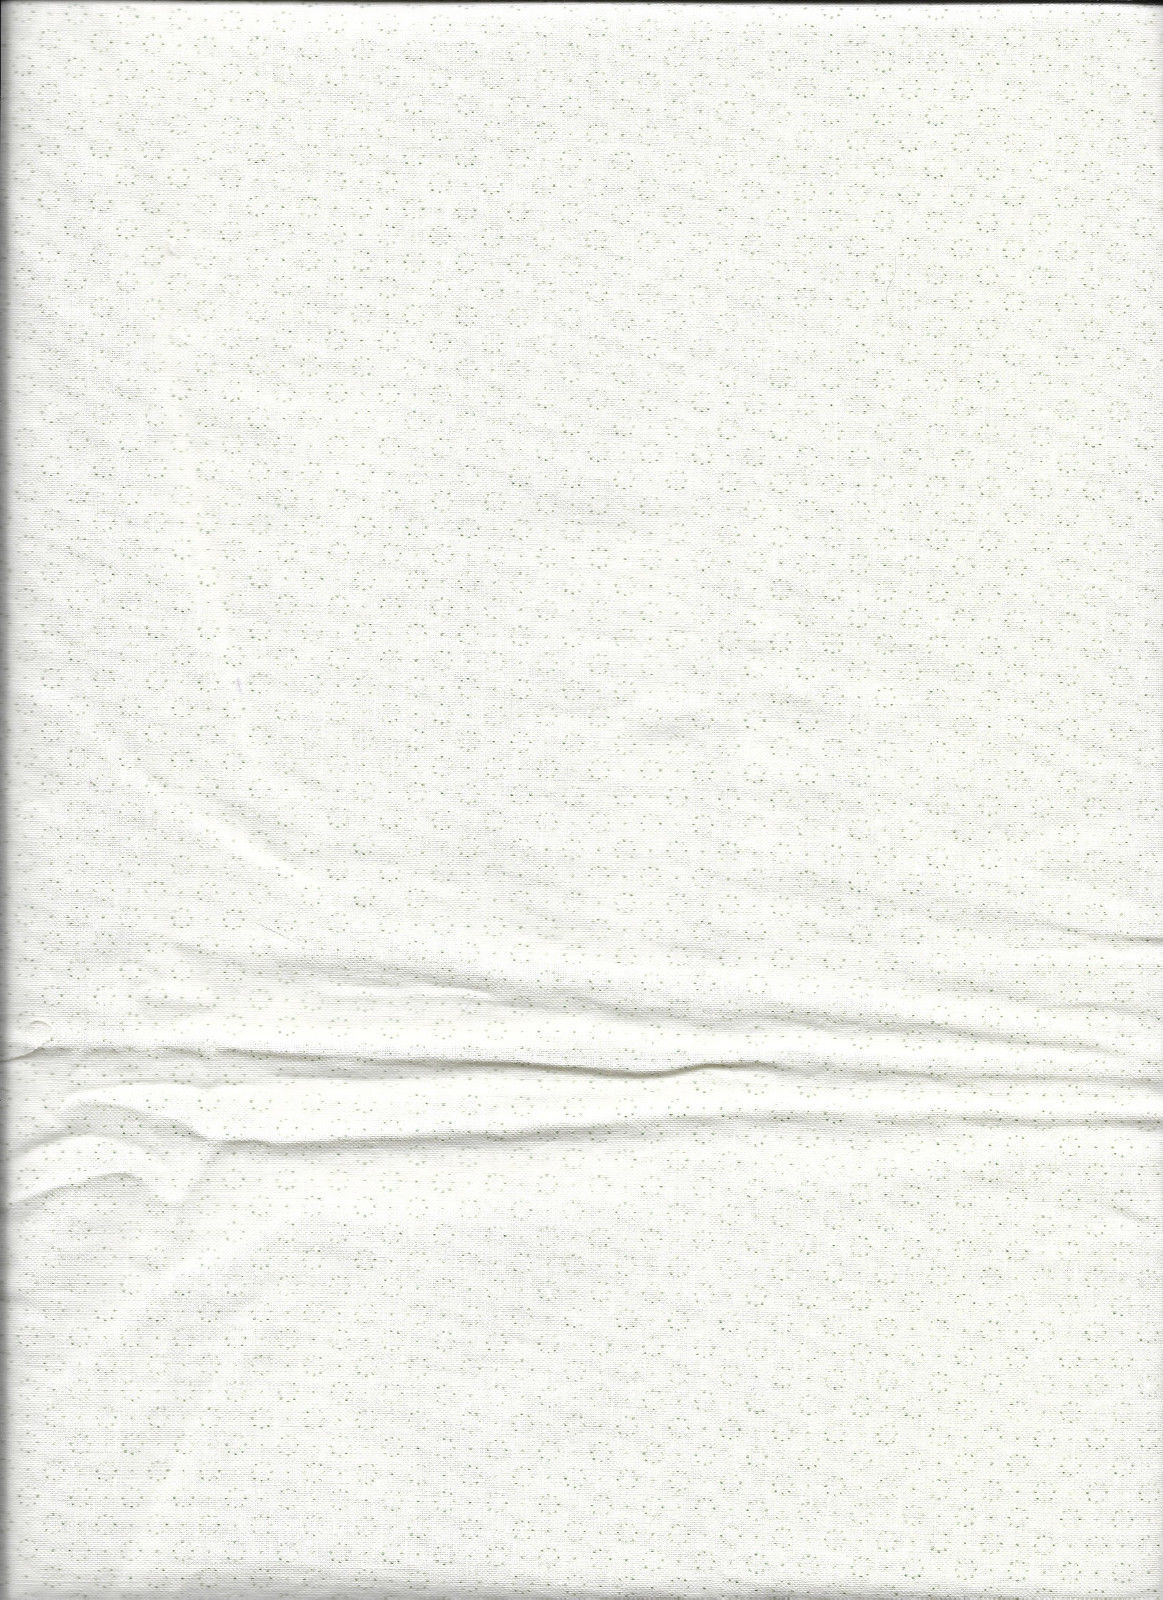 Primary image for New White with Small Circles 100% cotton fabric by the 1/4 yard